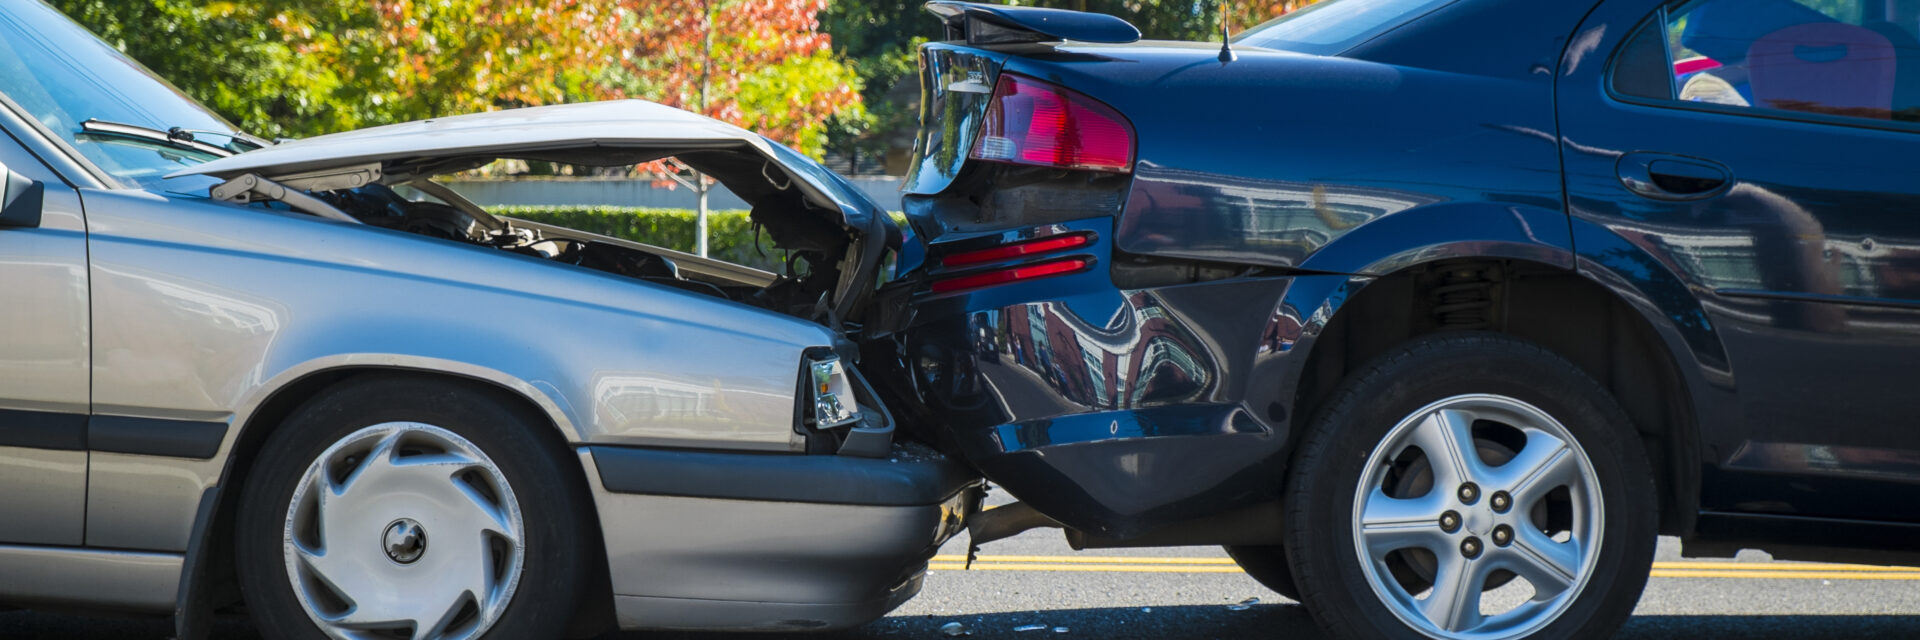 How Long Do I Have to File a Car Accident Claim in St. Petersburg, FL?